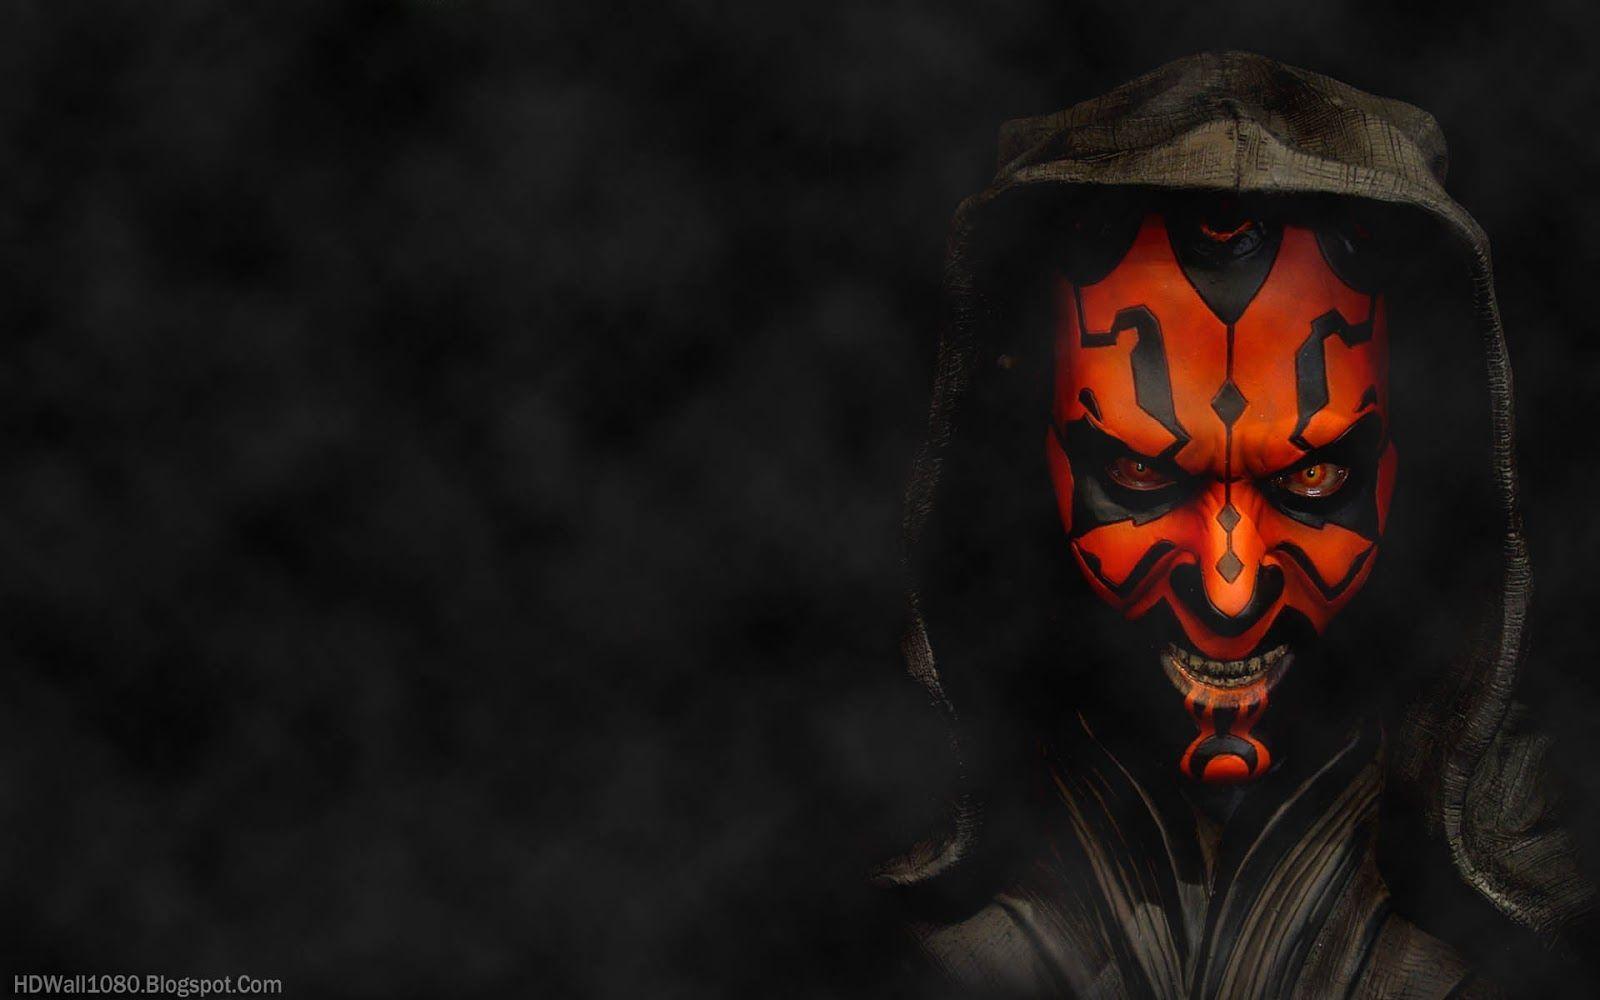 image For > Sith Wallpaper HD